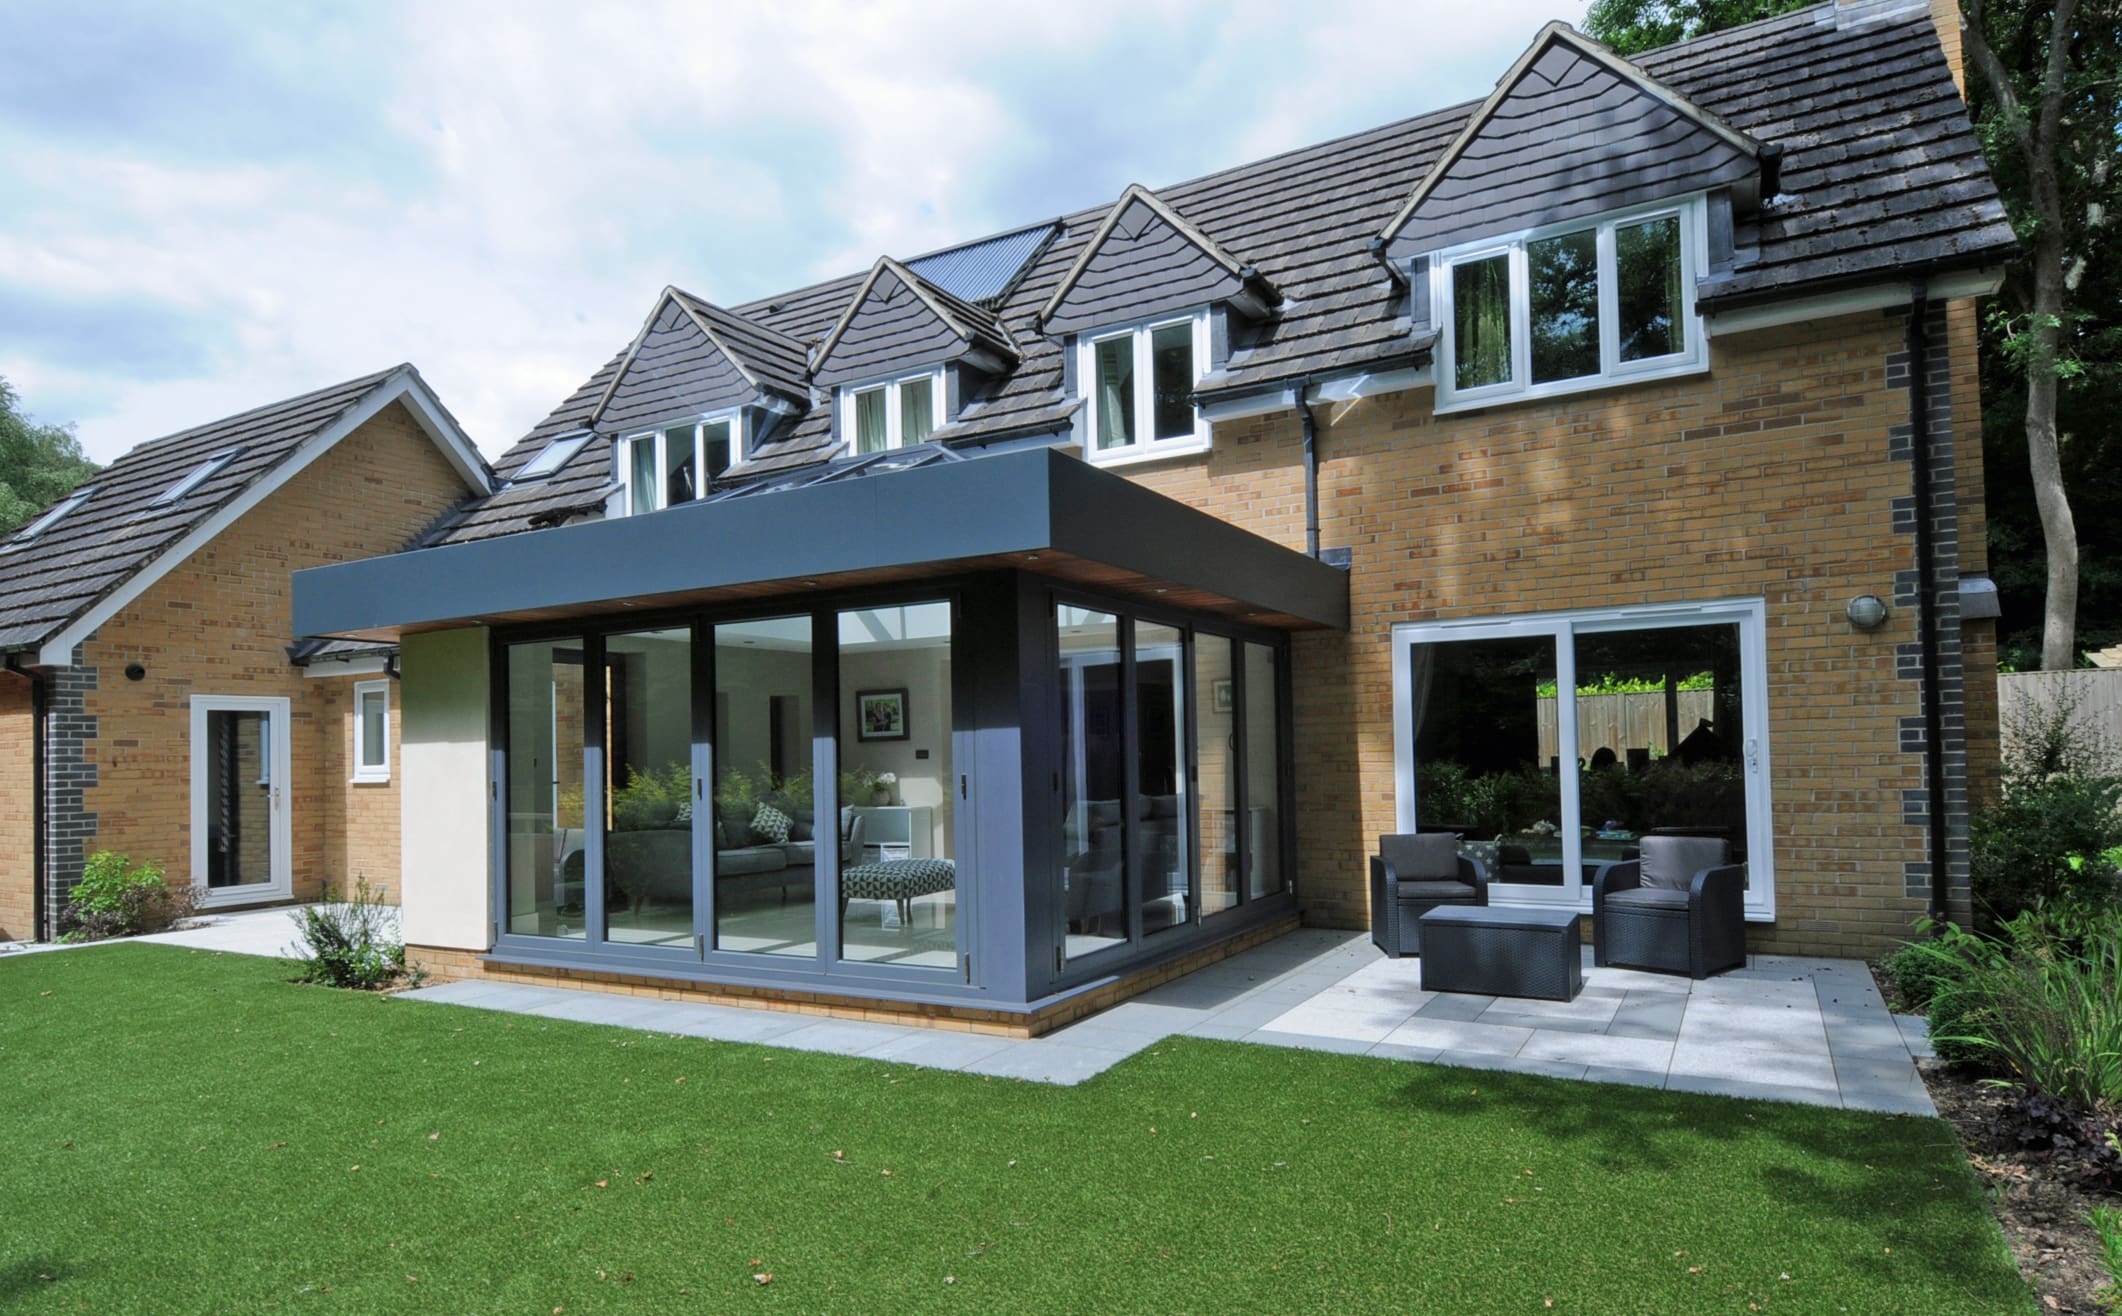 Rear of a substantial property with orangery extension and bifolding doors.